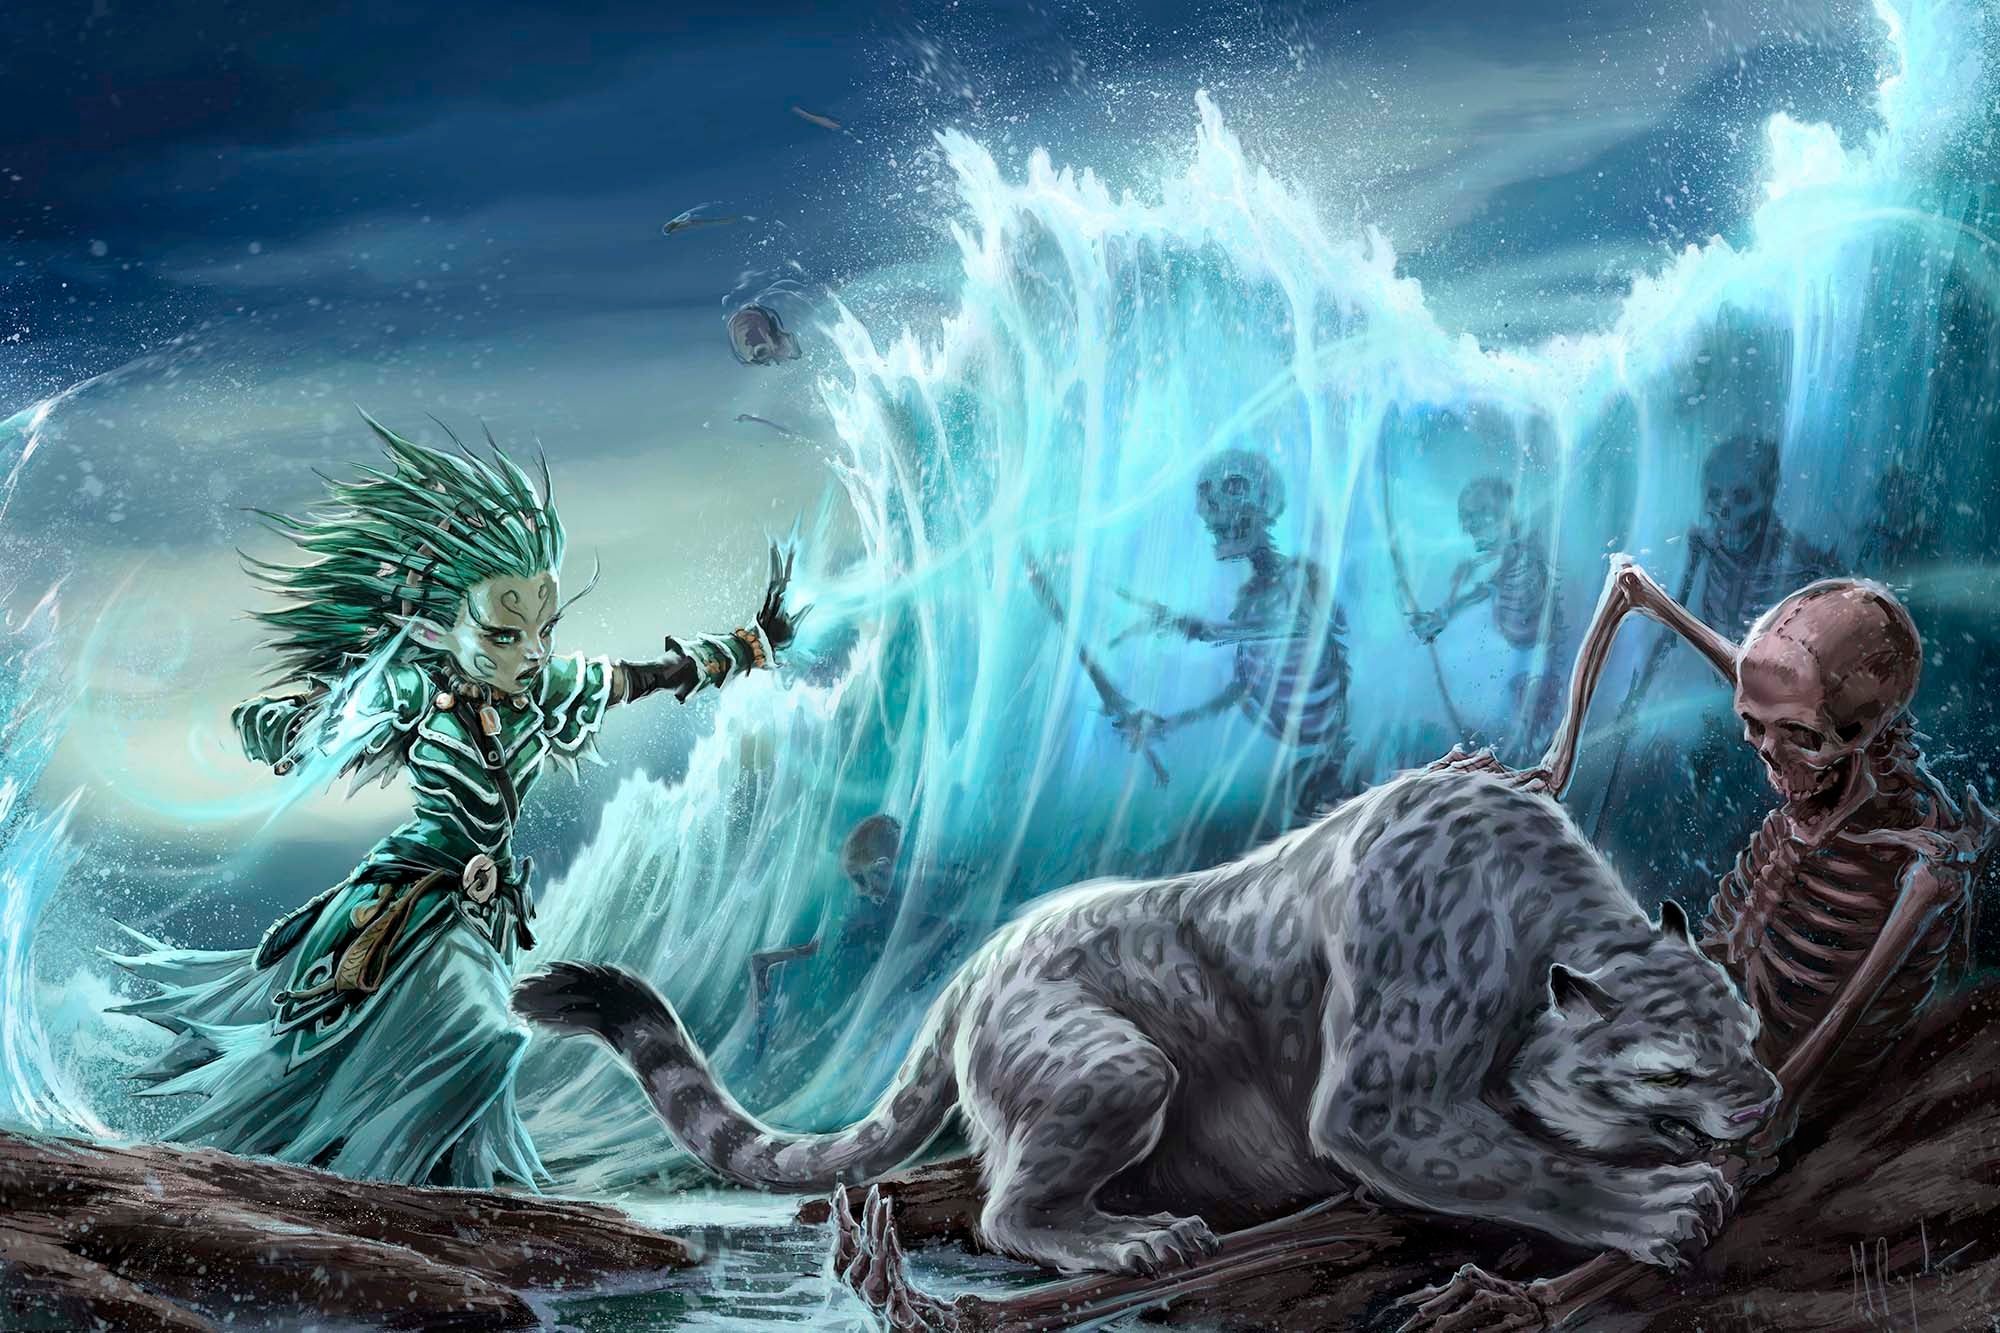 The gnome druid, Lini, conjures a magical wall of water, blocking the path of an army of animated skeletons. Nearby, her snow leopard companion gnaws on a skeleton that avoided the spell.